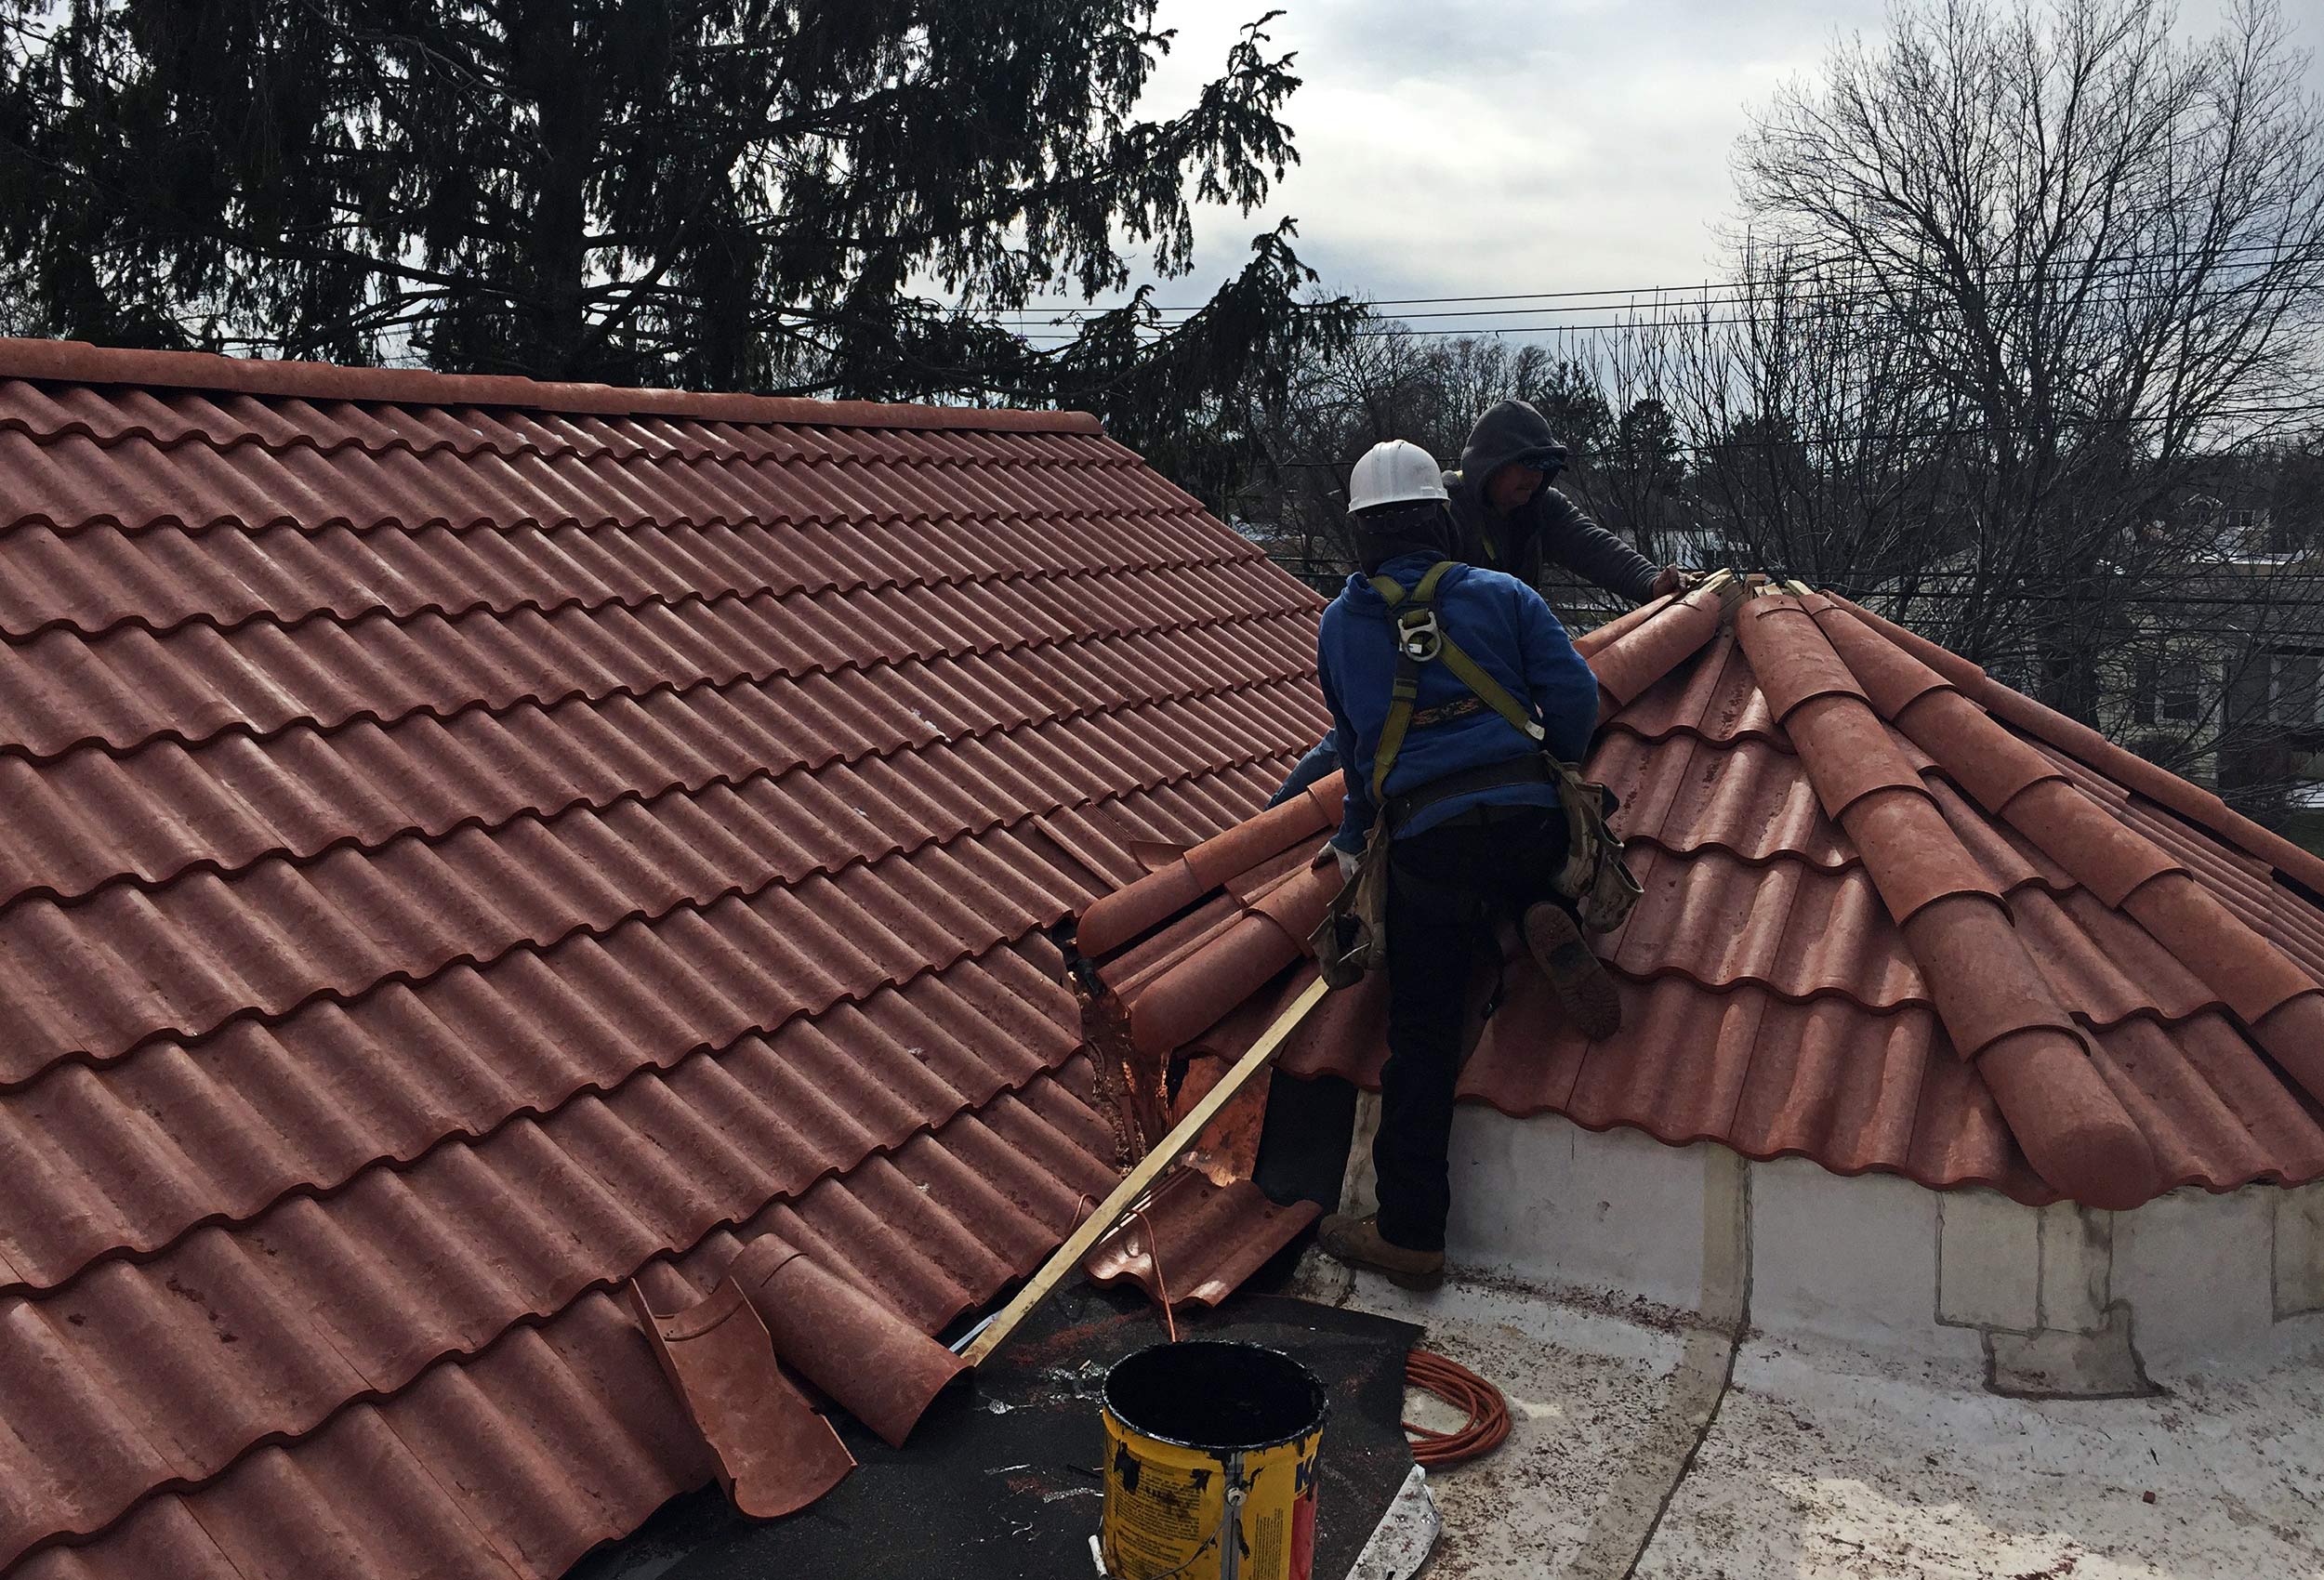 Roofing construction